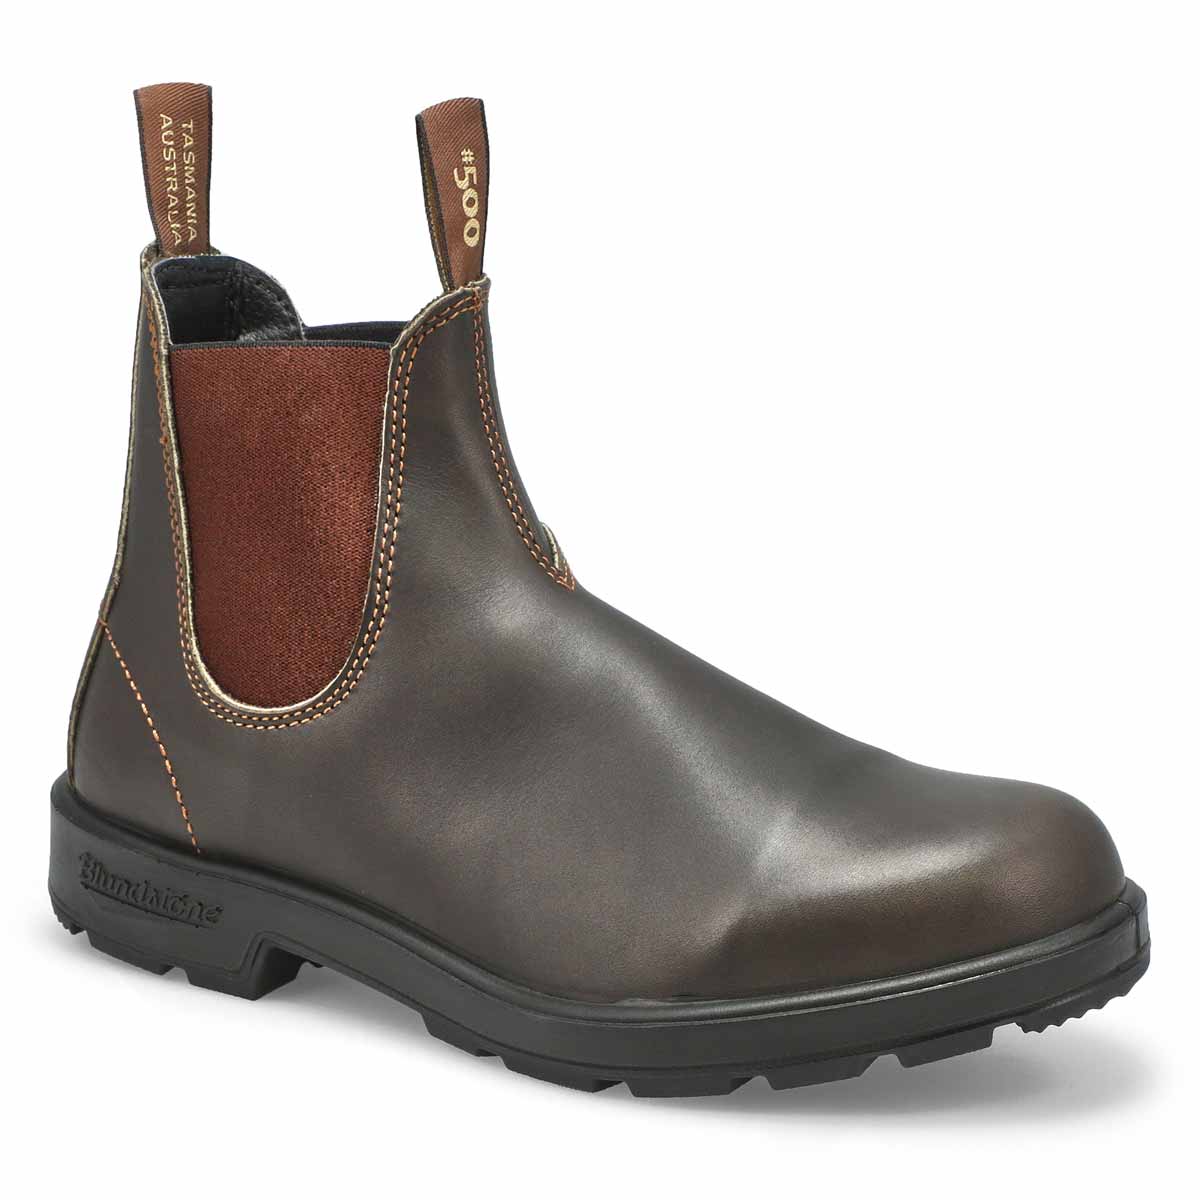 blundstone boots price